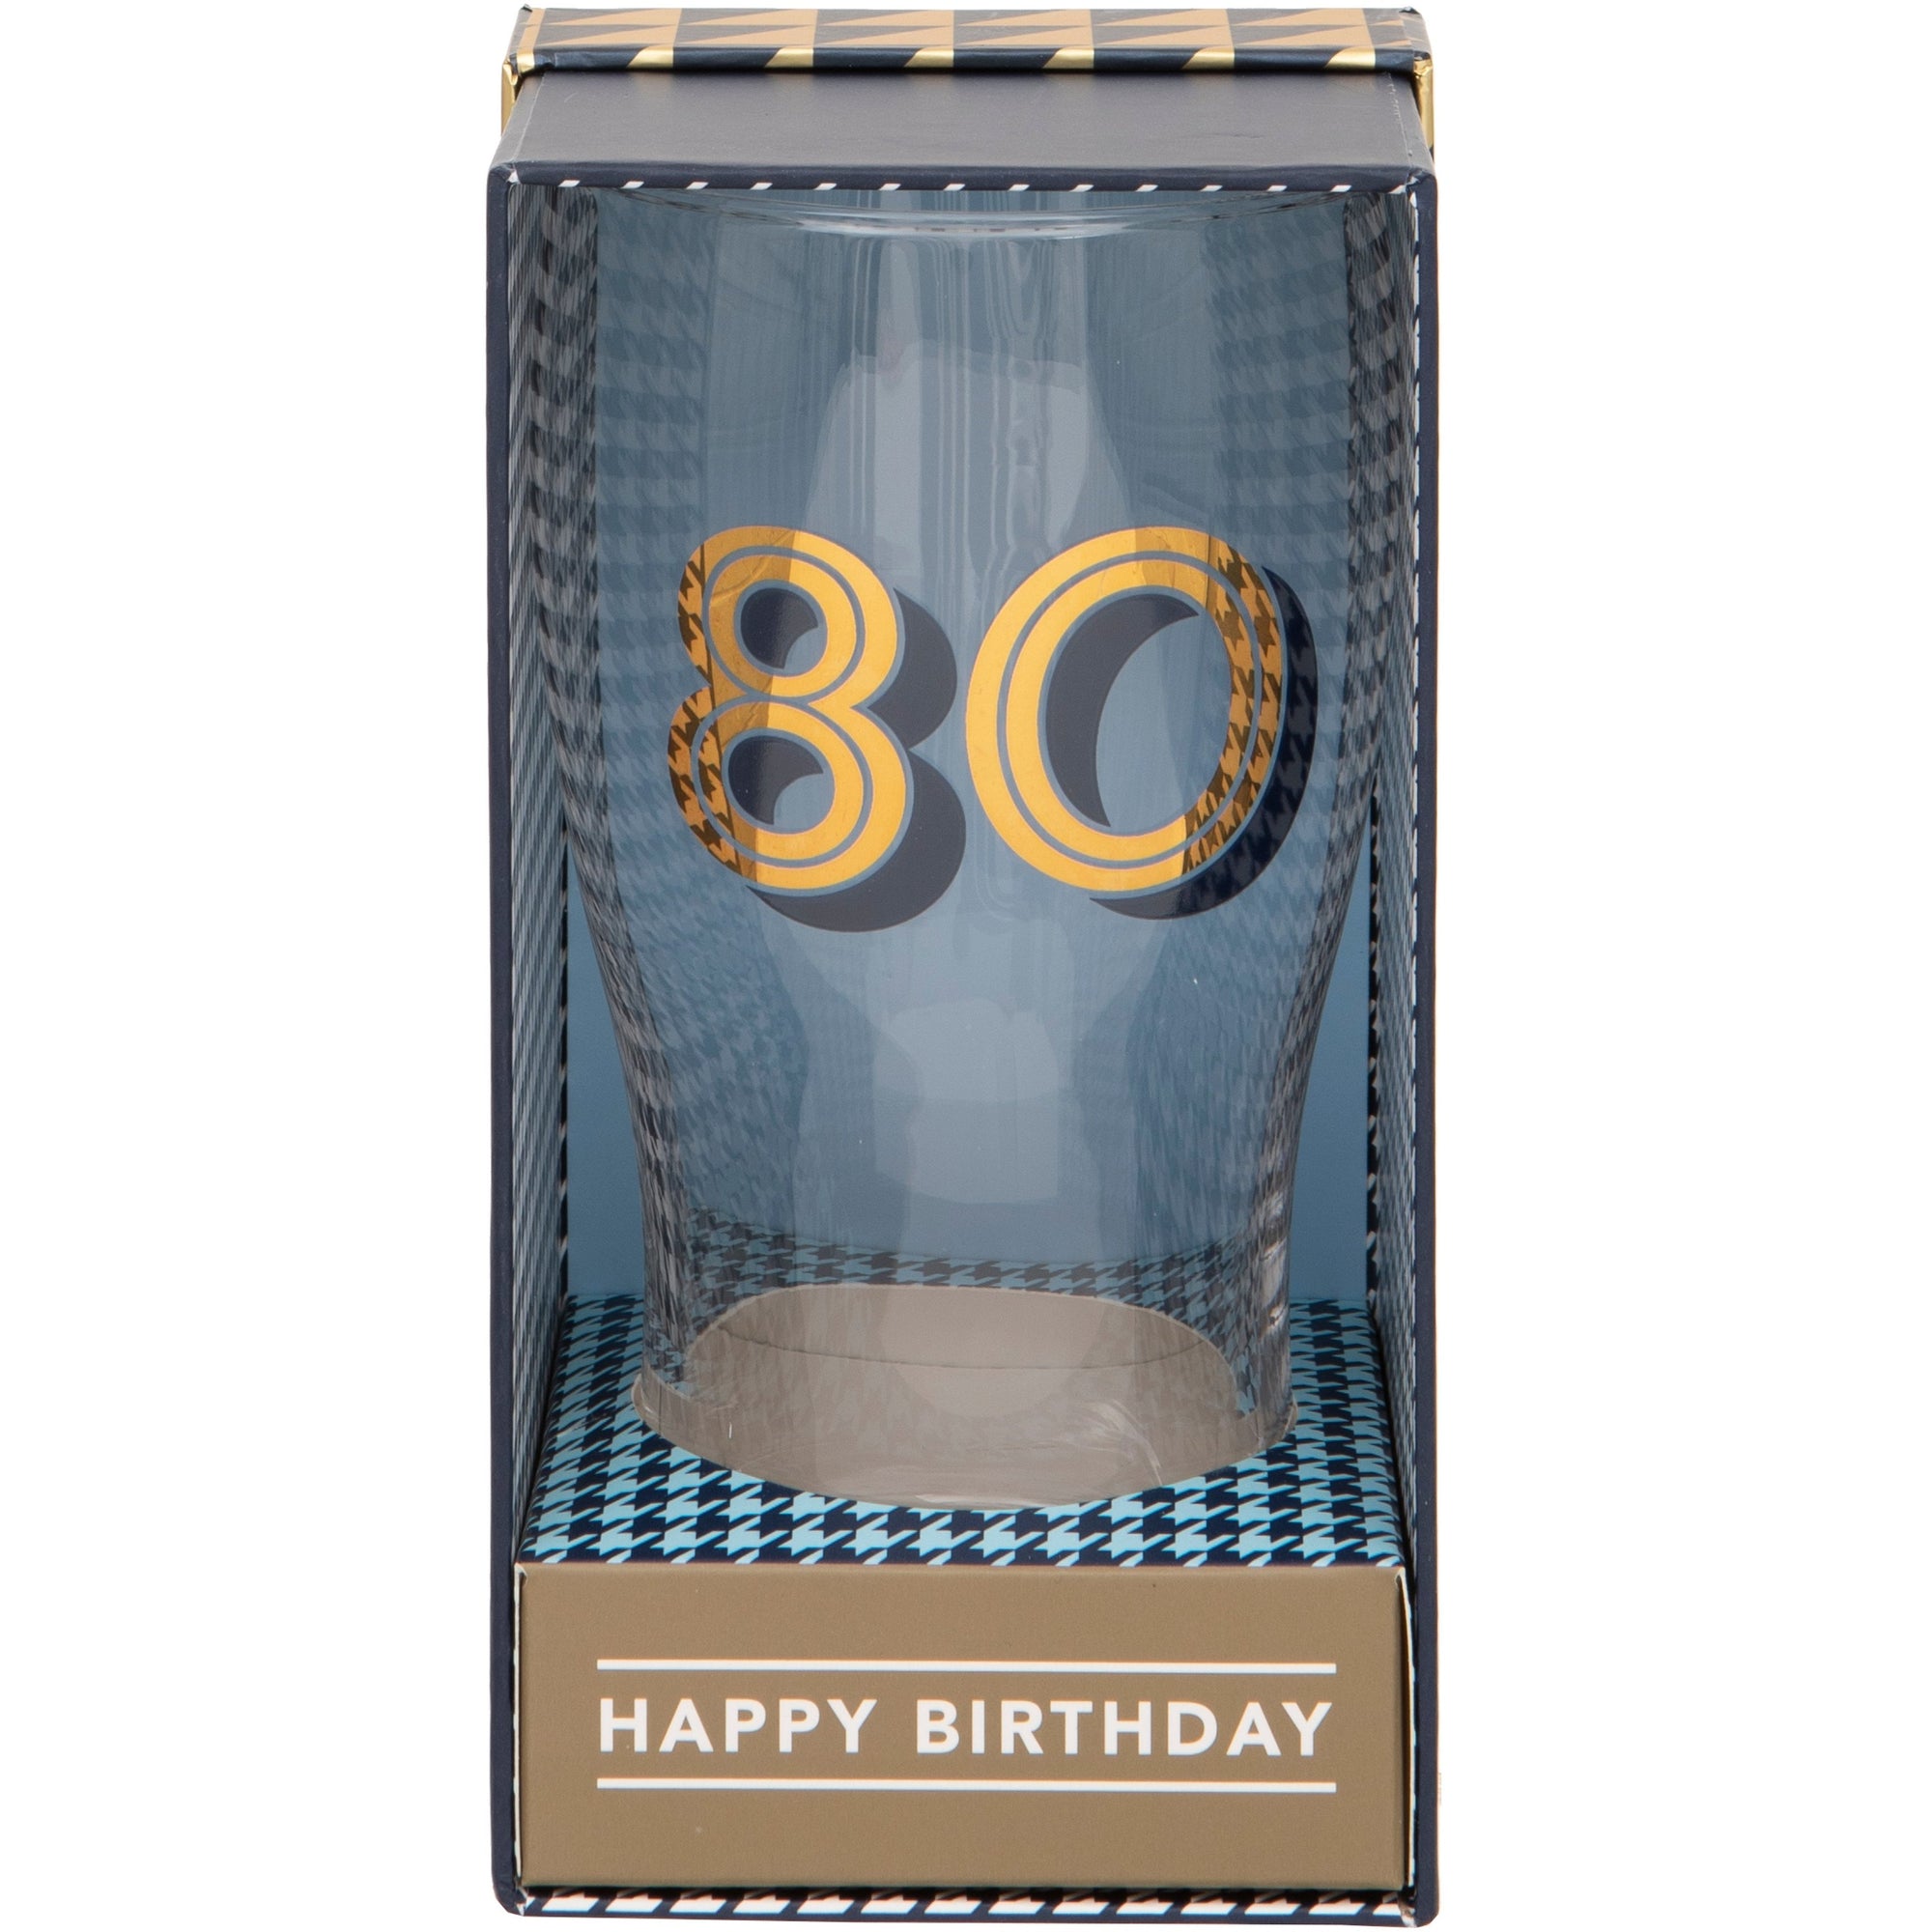 Gold Collection 80th Birthday Beer Pint Glass